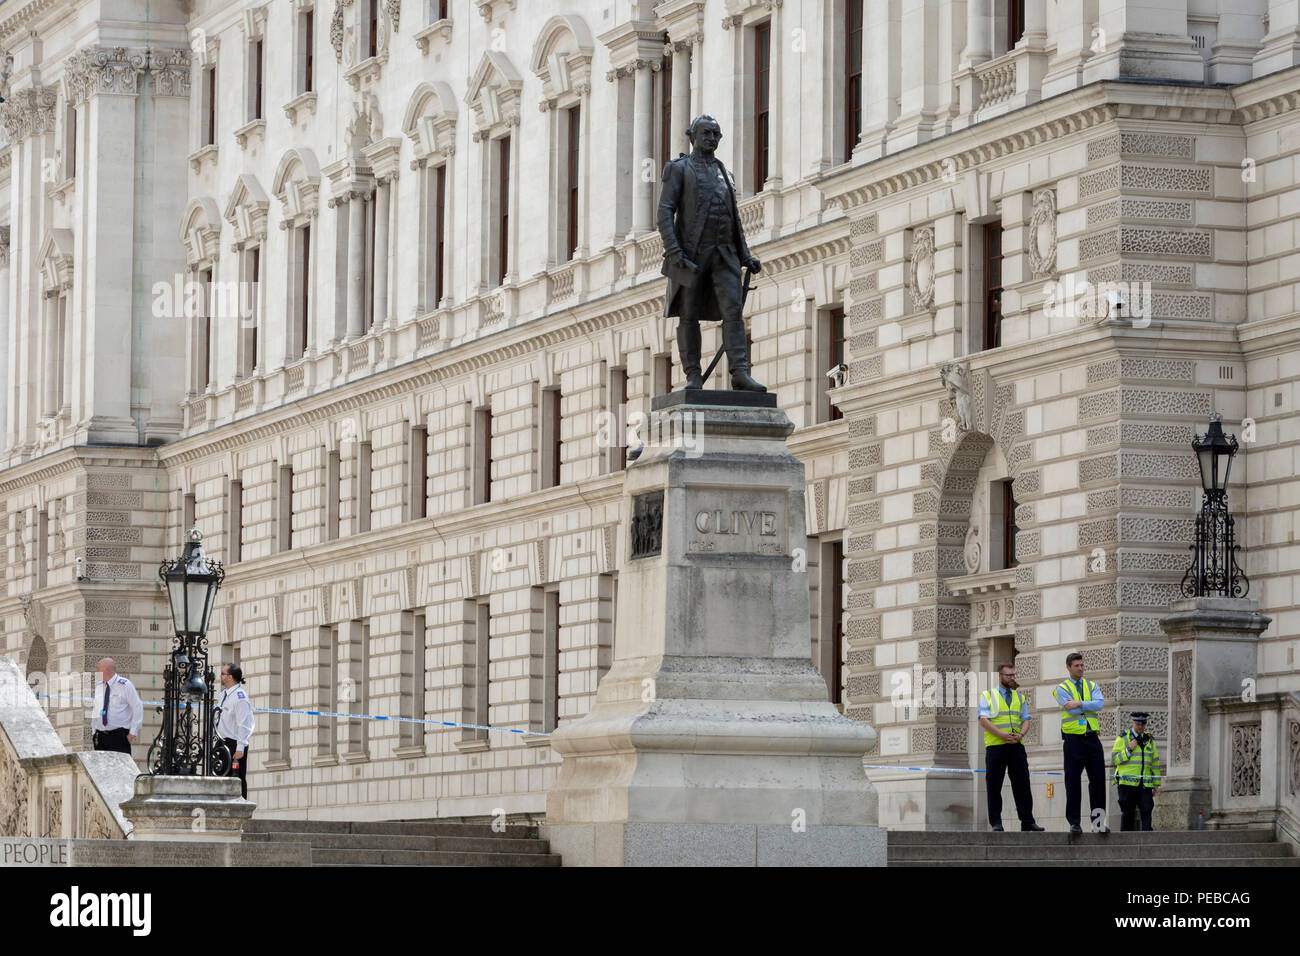 London, UK 14th August 2018: The Foreign Office in King Charles Street is blocked as Westminster experiences a lockdown with extensive cordons and the closure of many streets after what police are calling a terrorist incident in which a car was crashed into security barriers outside parliament in central London, on 14th August 2018, in London, England. Photo by Richard Baker / Alamy Live News. Stock Photo